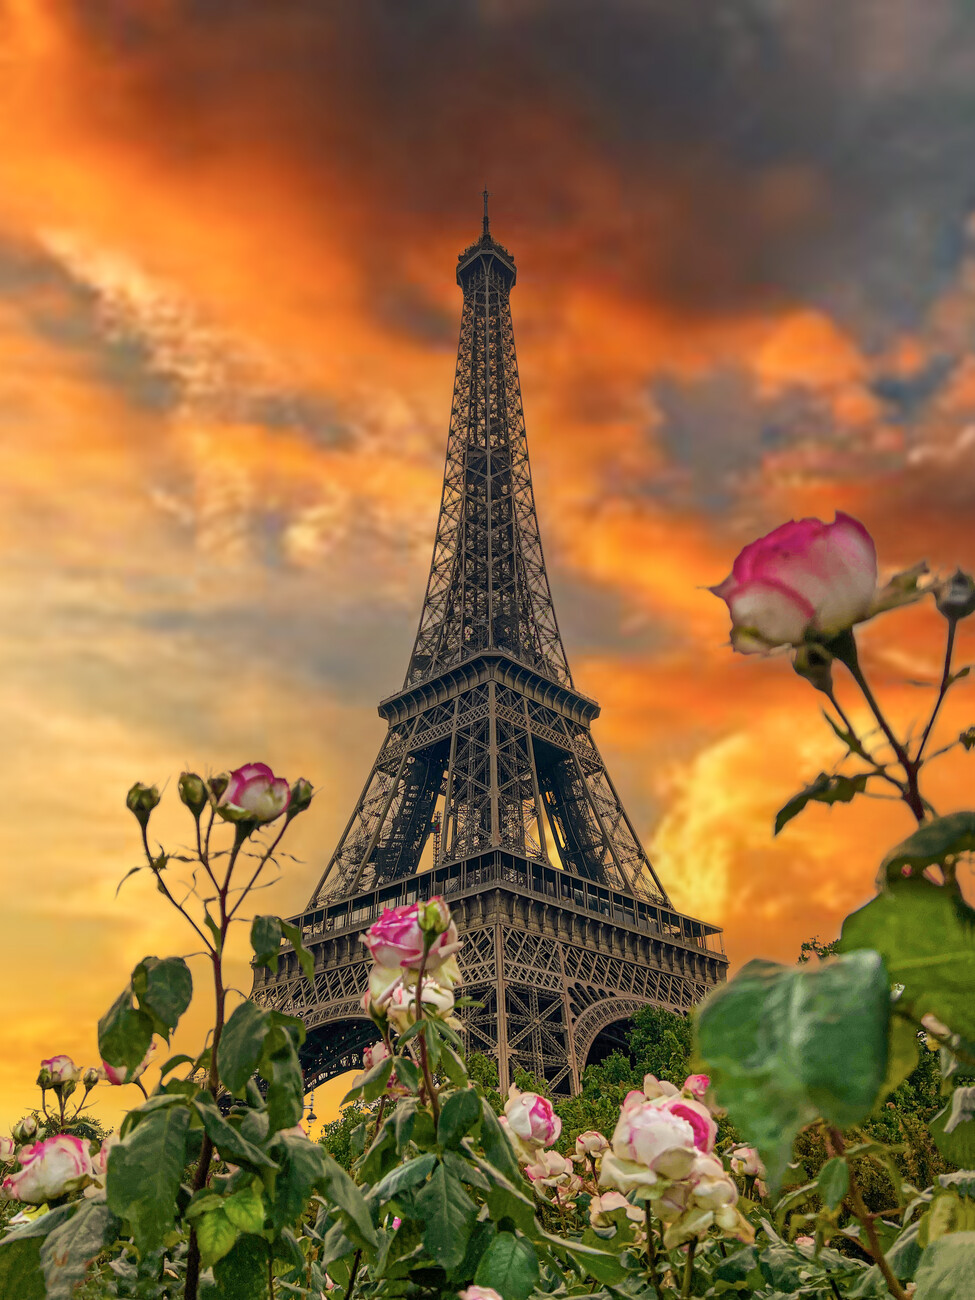 Paris Photo Wallpaper Wall Mural Eiffel Tower DECOR Giant Paper Poster  Picture